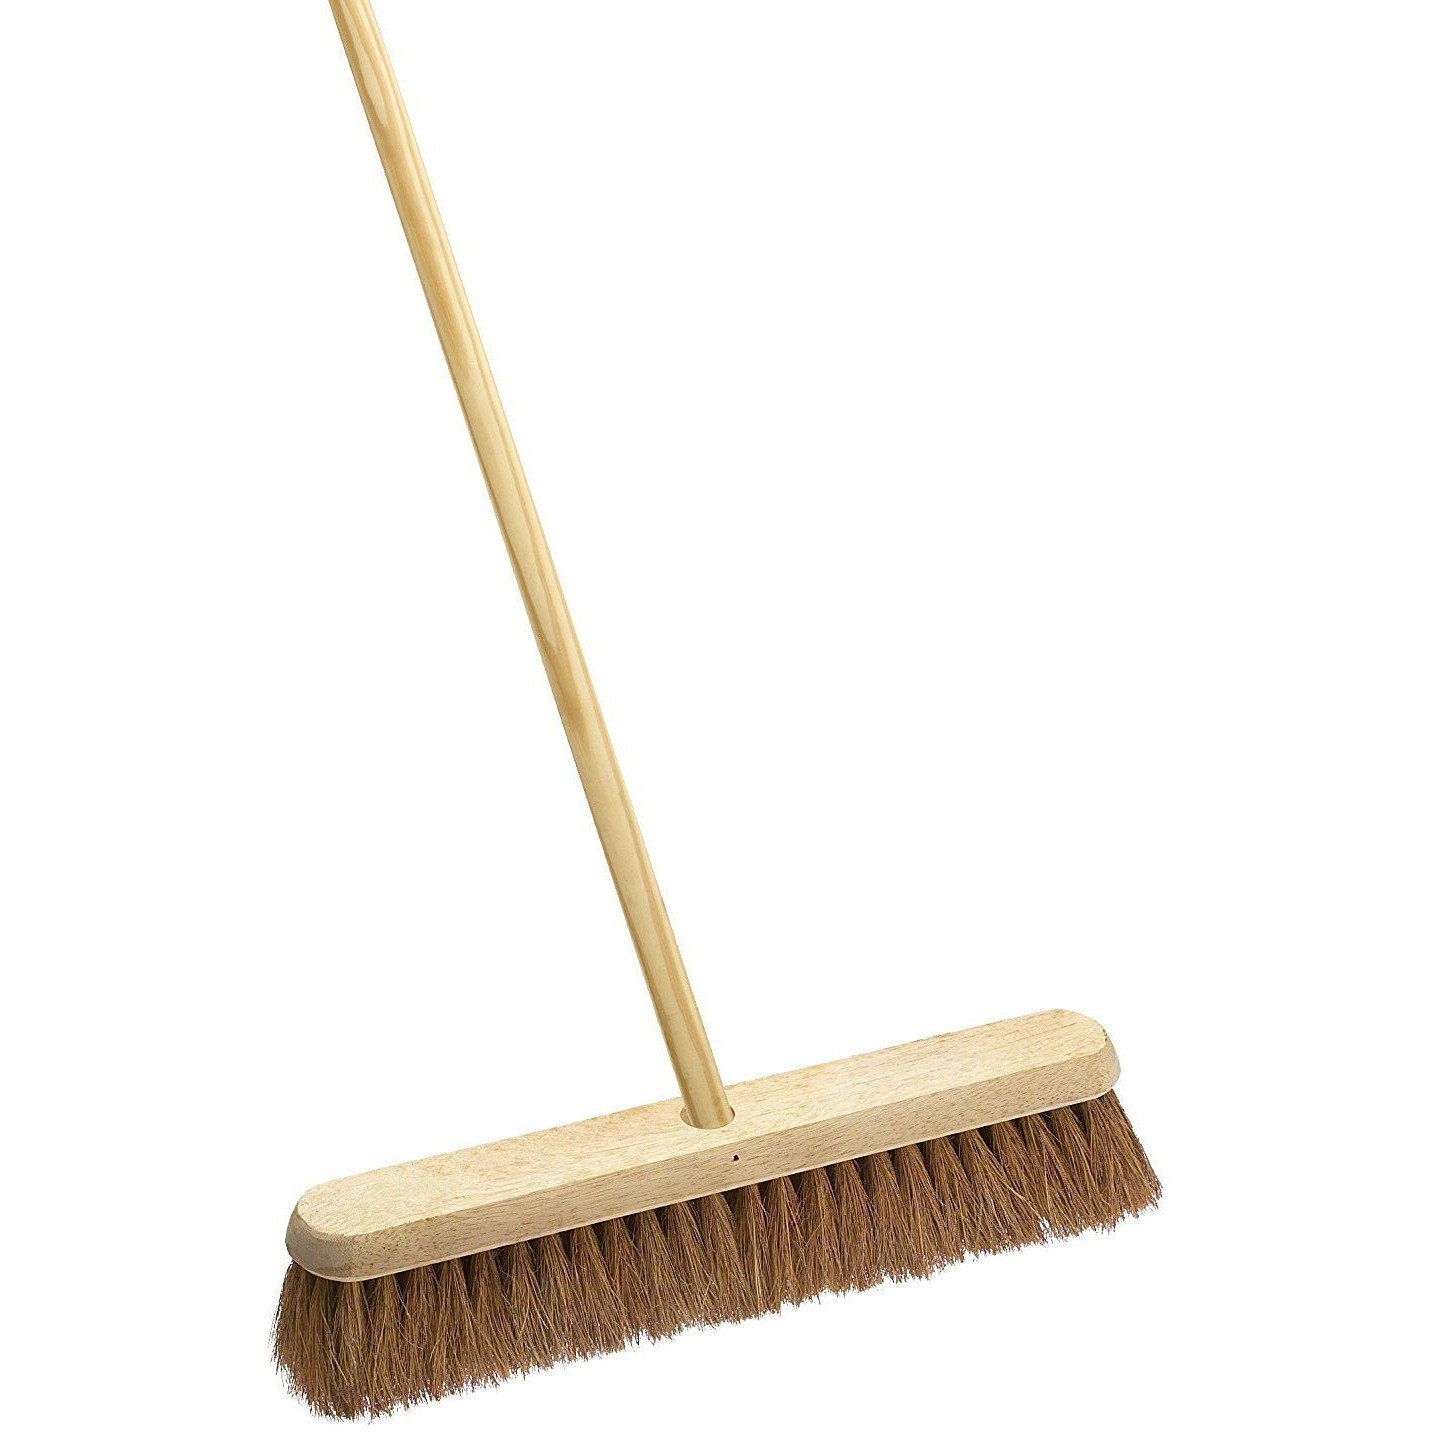 18″ Soft Natural Coco Broom Head with Strong Wooden Brush Handle